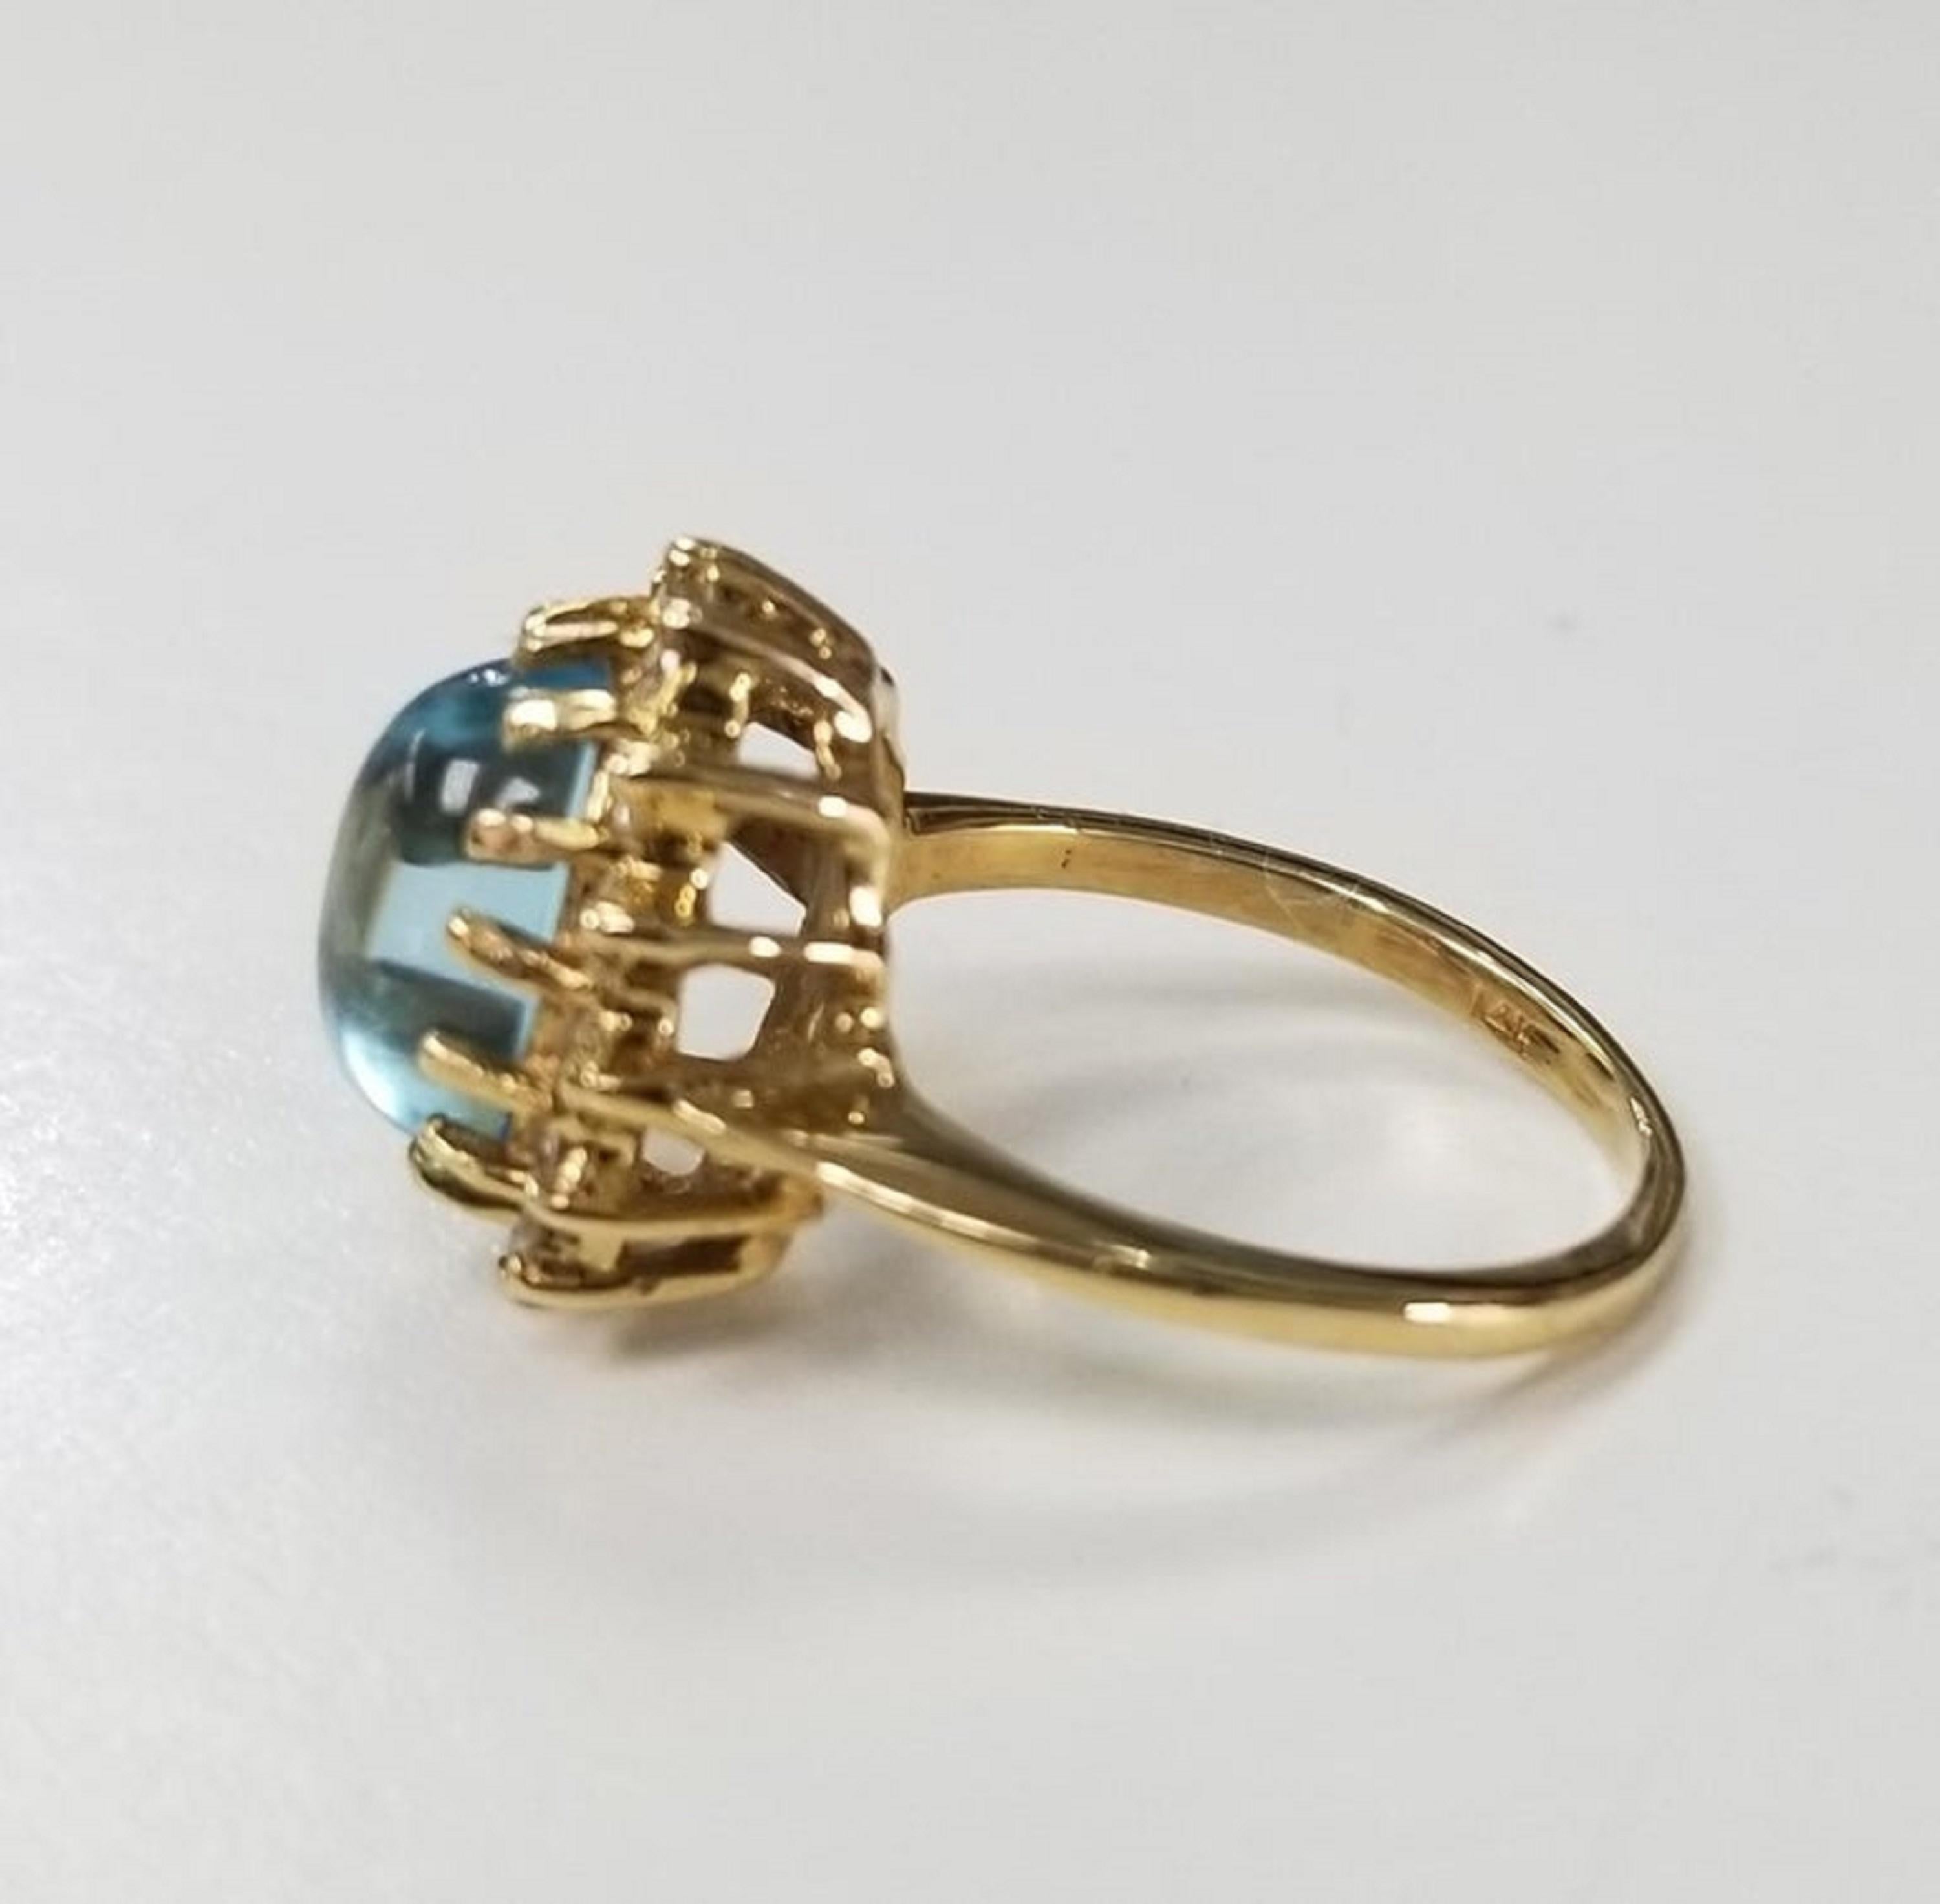 14k yellow gold Blue Topaz Cabochon and Diamond ring, containing 1 oval cabochon cut blue topaz weighing 3.75cts. and 14 round full cut diamonds weighing .40pts.  This ring is a size 5 but we will size to fit for free.